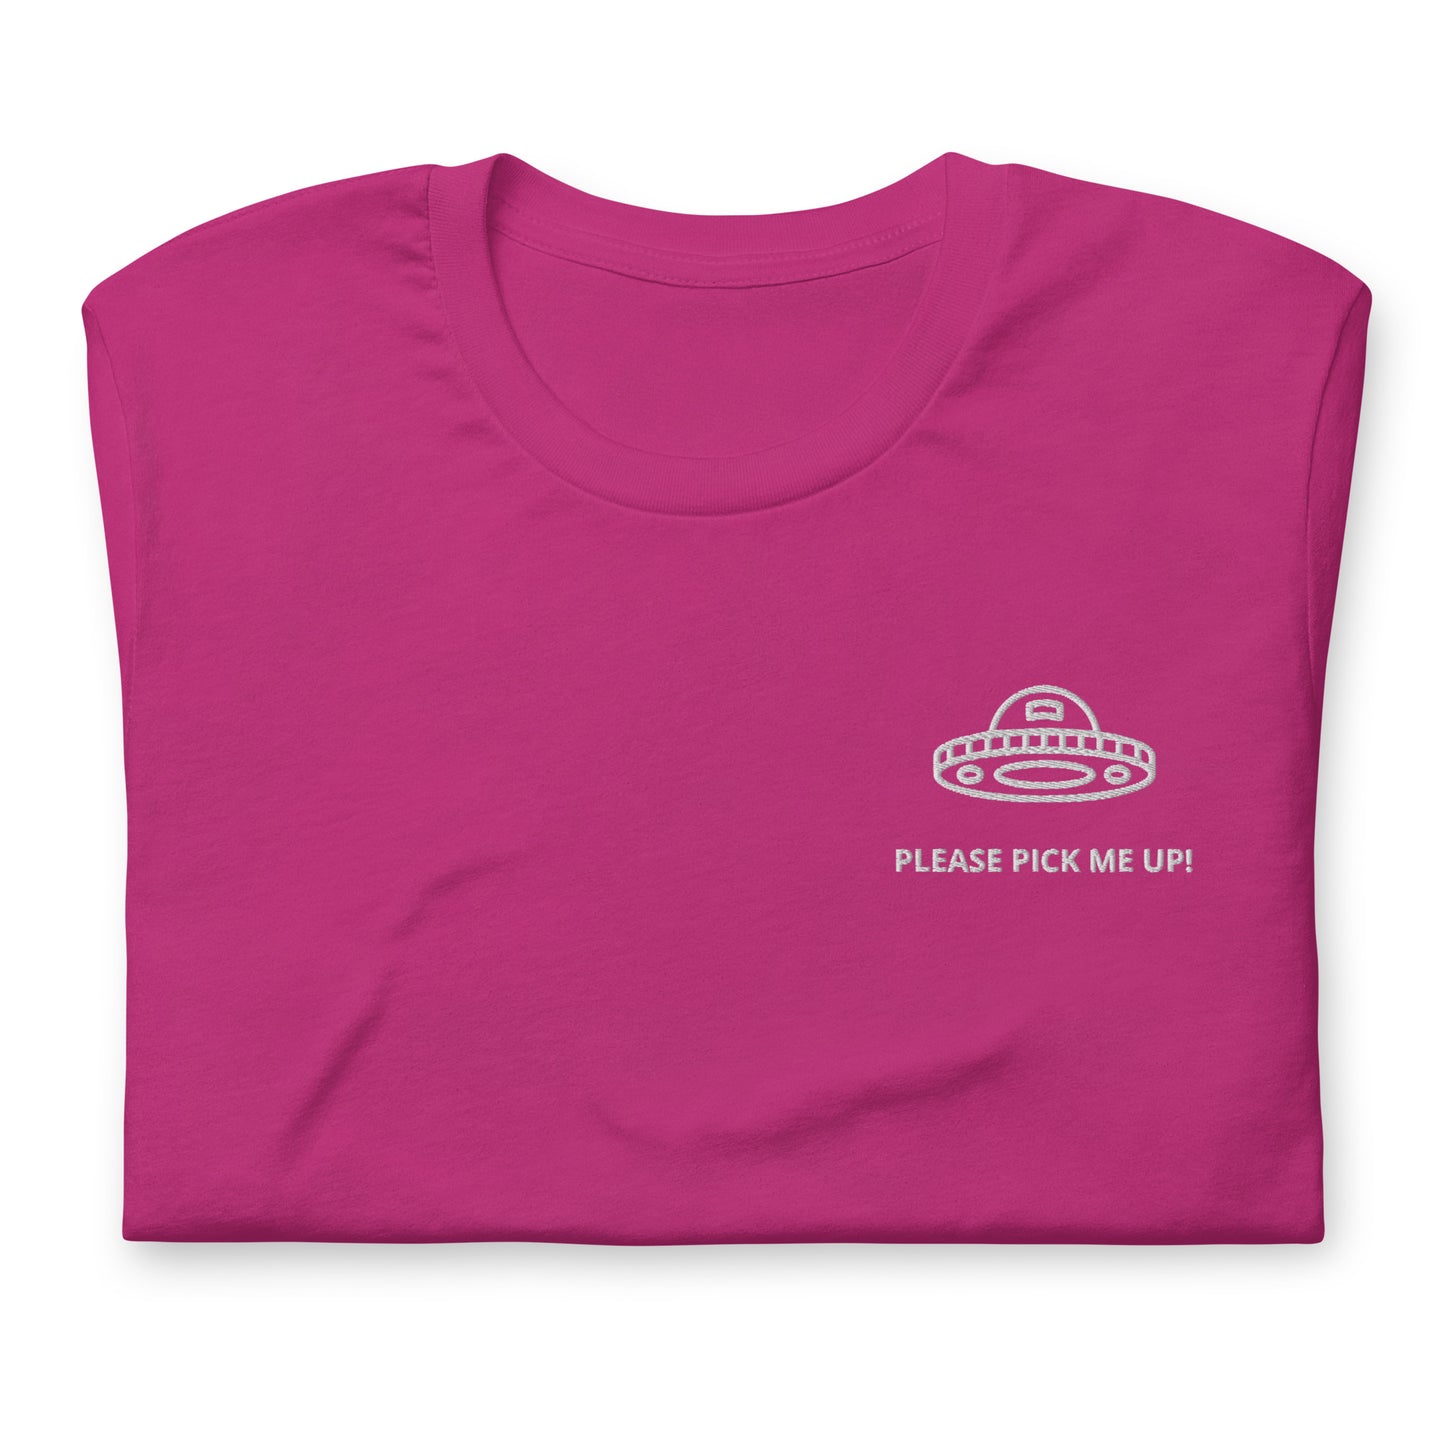 PLEASE PICK ME UP! - embroidered T-shirt